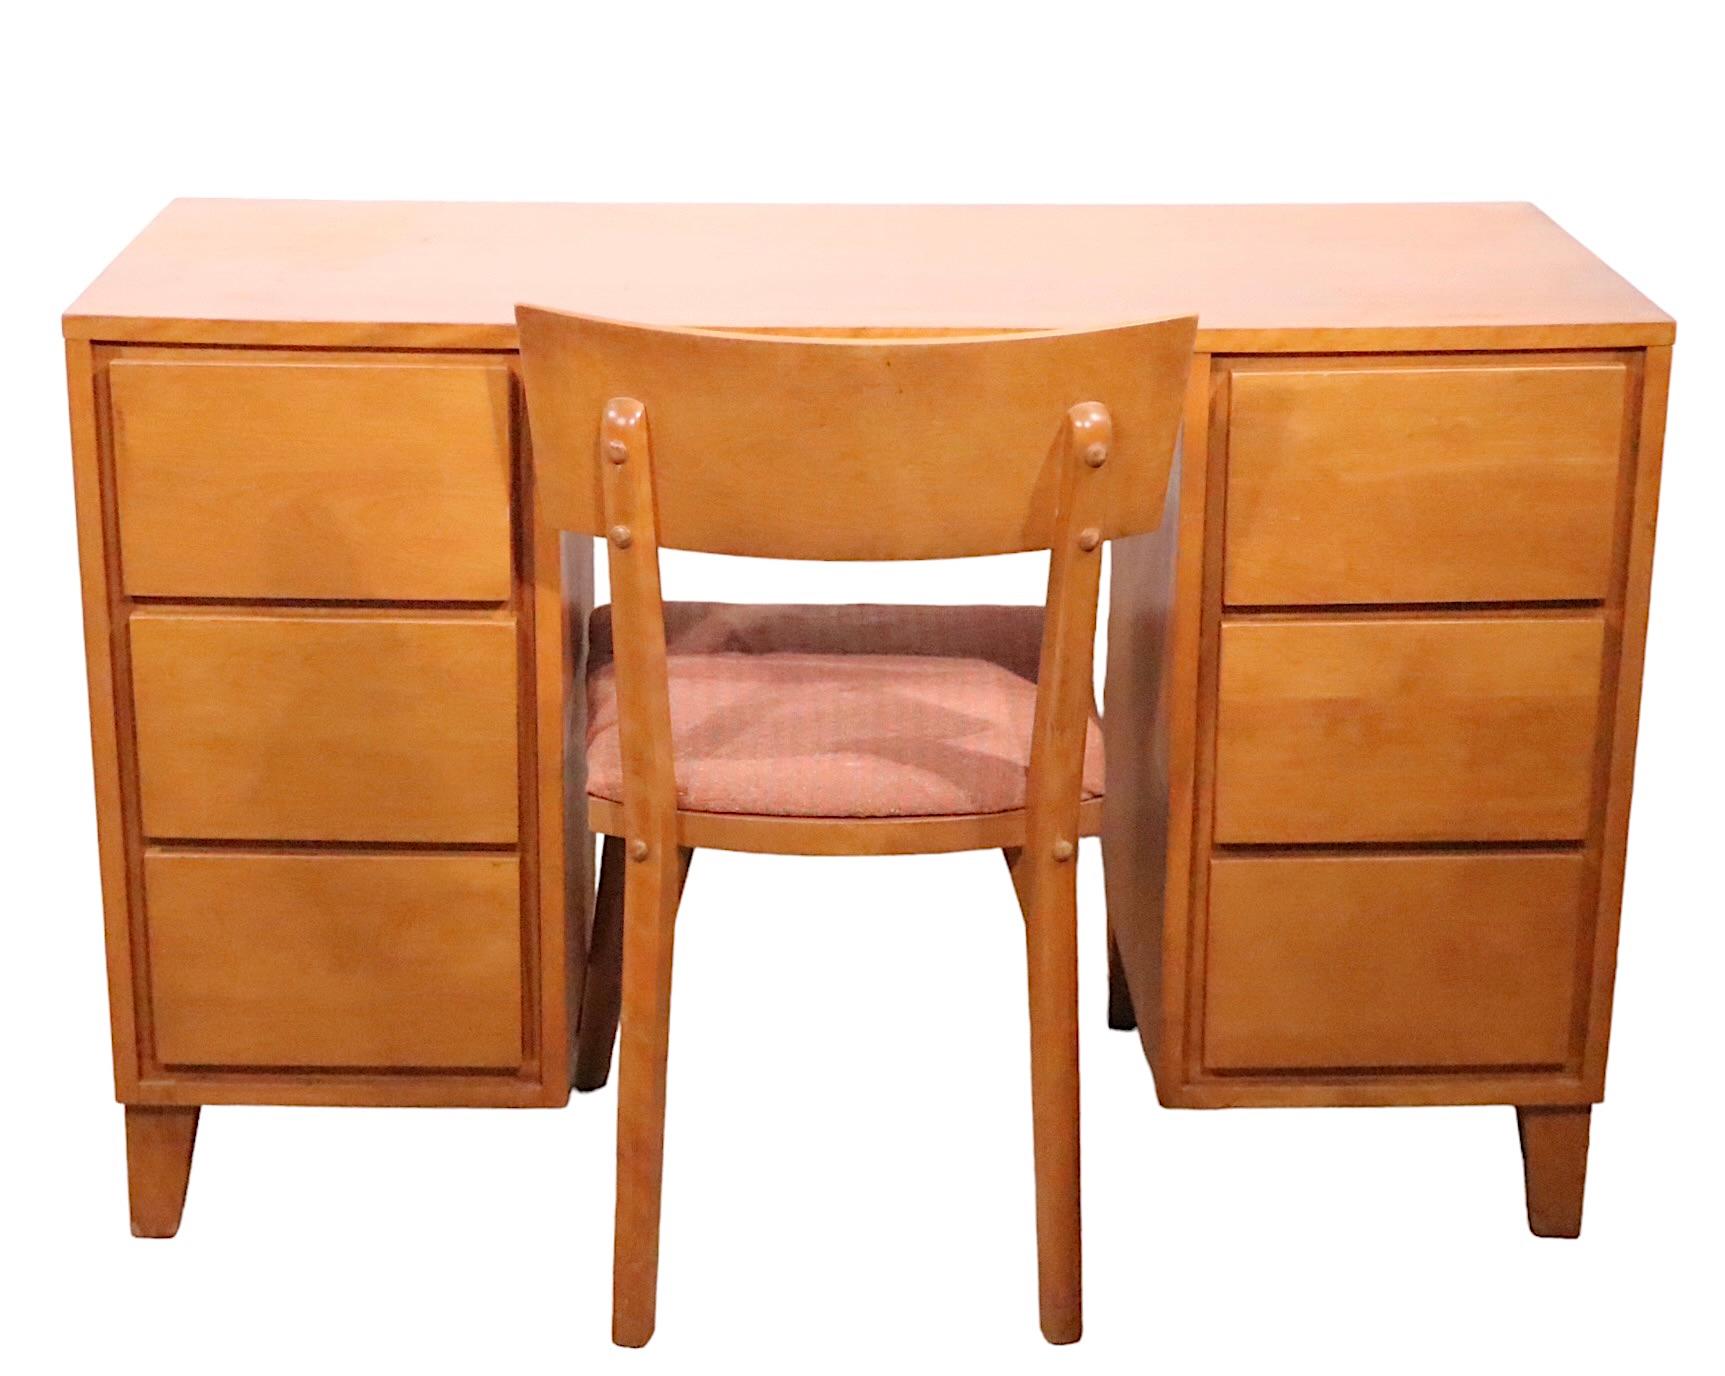 1950's Mid Century Desk and Chair Conant Ball  Modern Mates by Leslie Diamond   For Sale 7